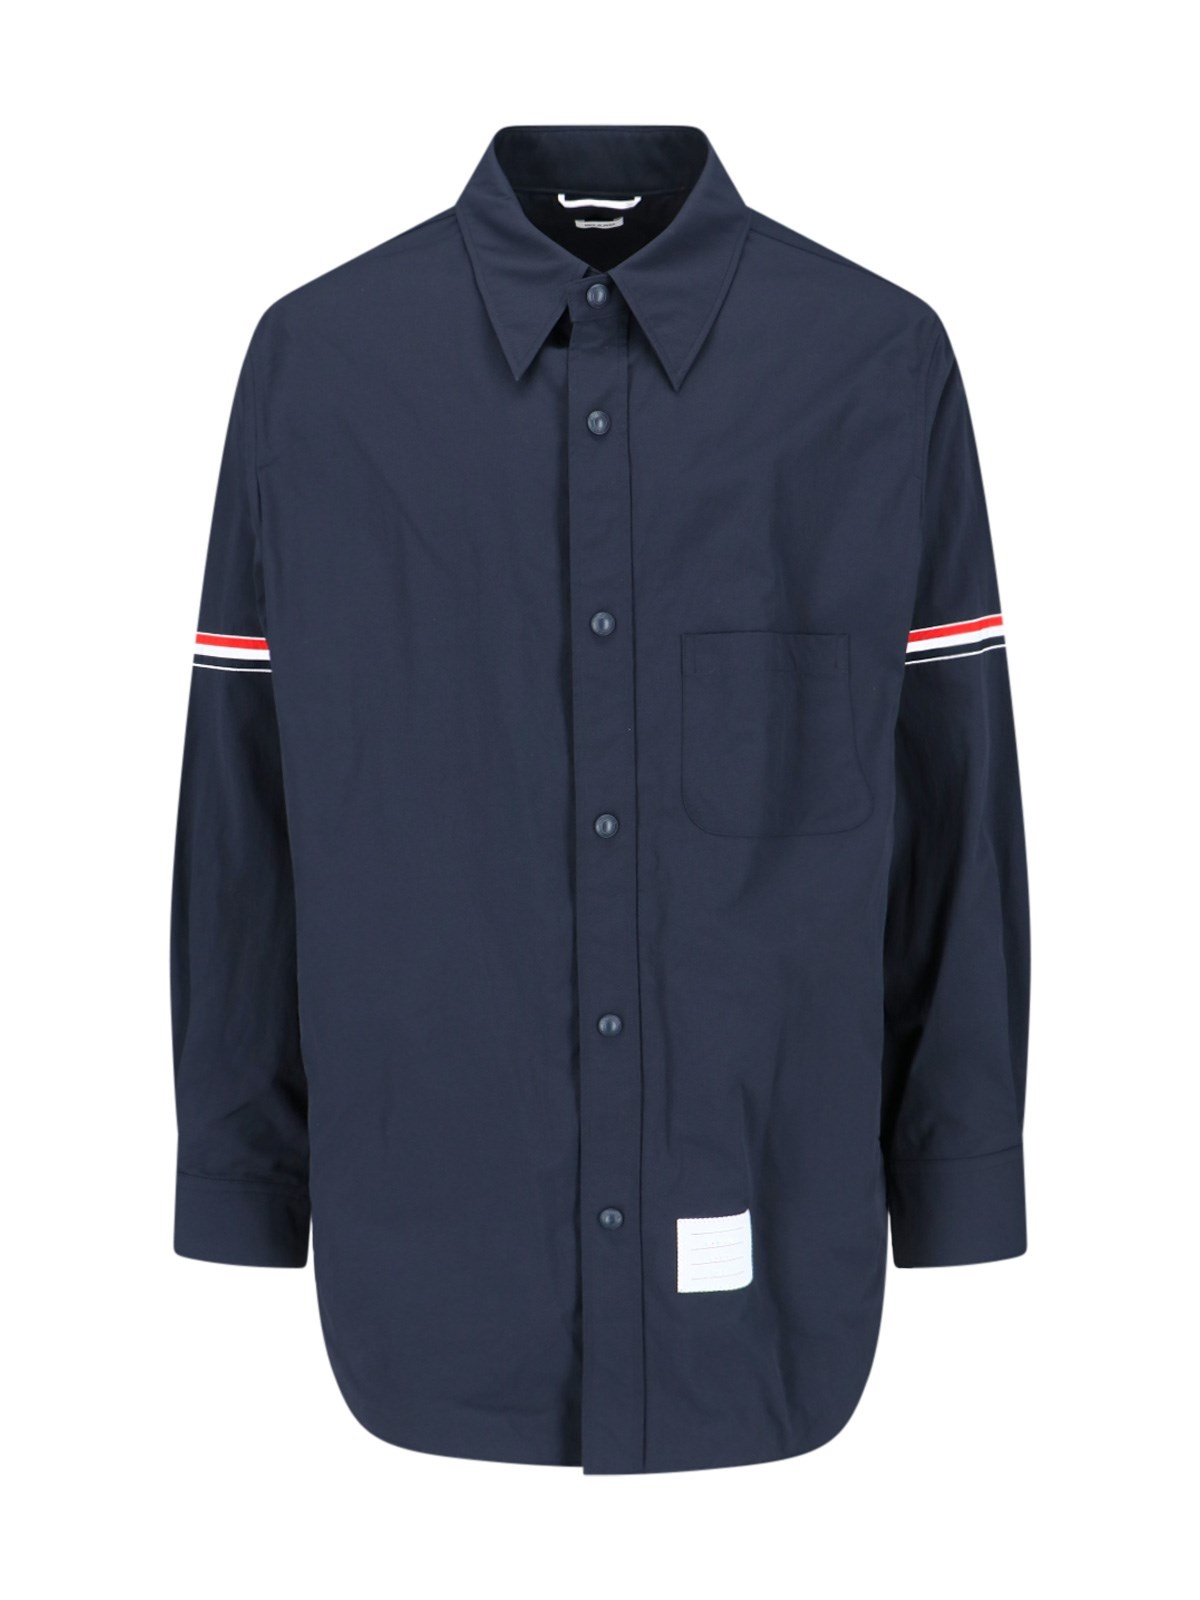 THOM BROWNE - NYLON BUTTONS JACKET - 1